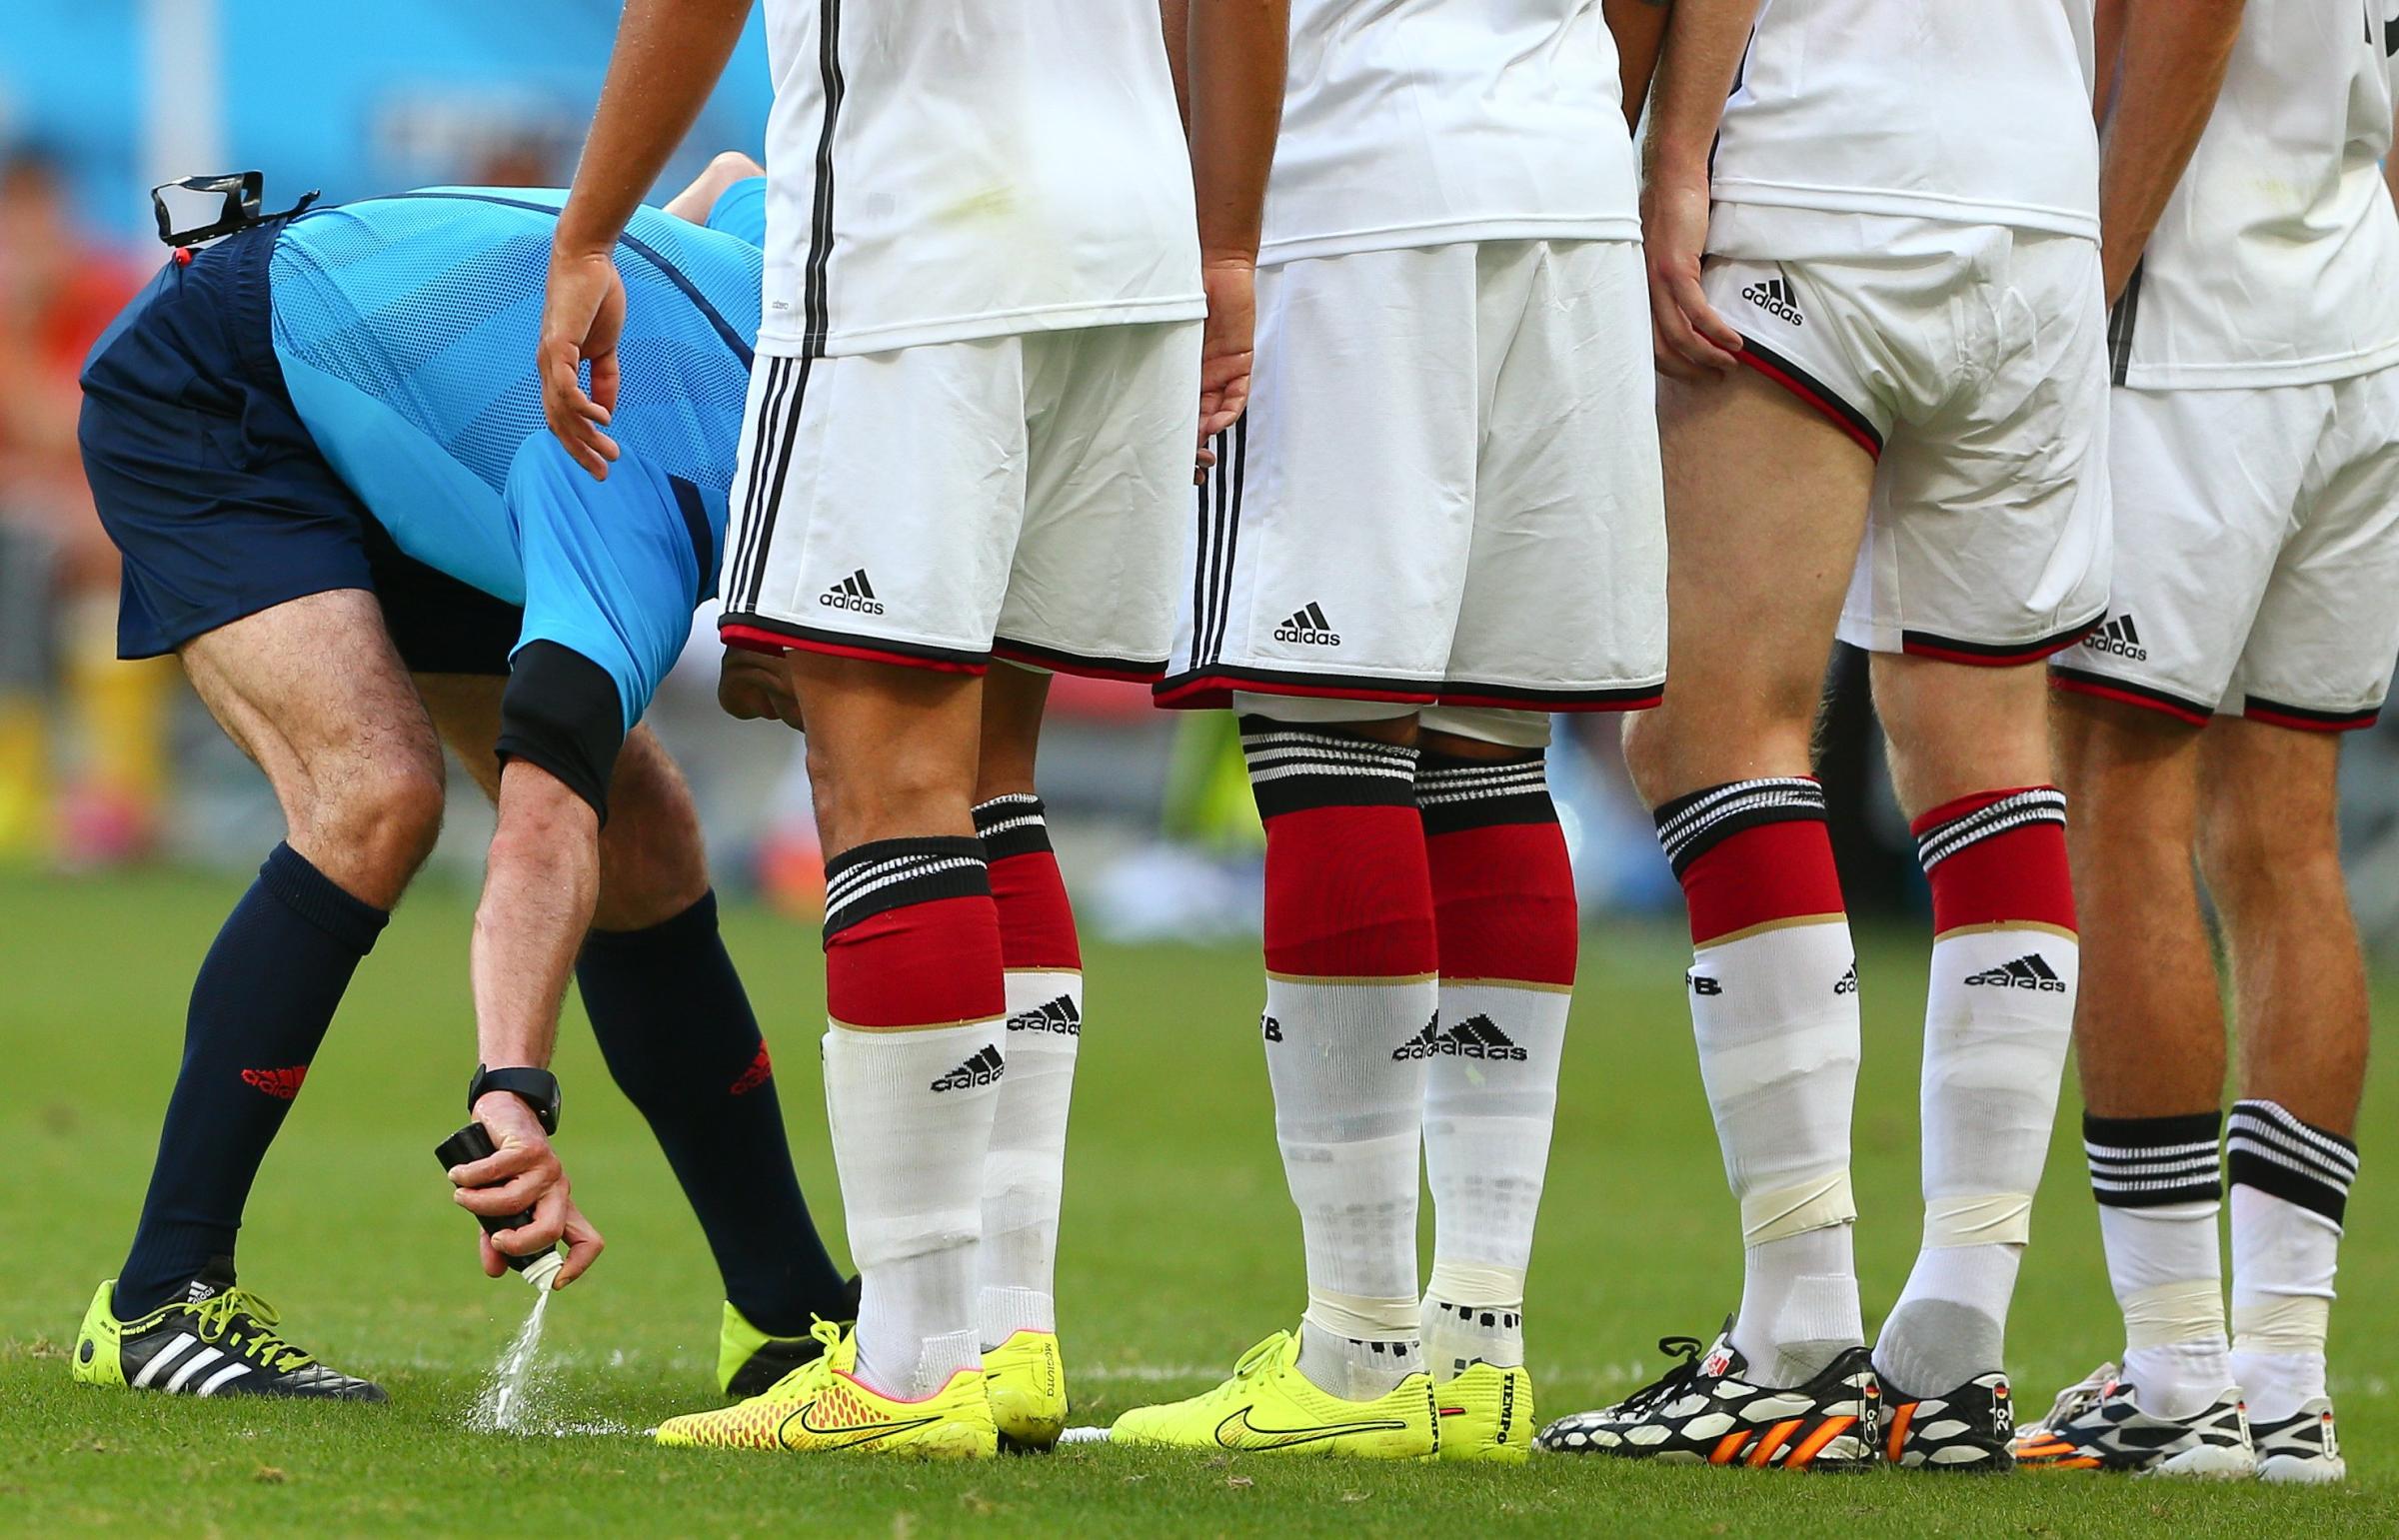 Referee Milorad Mazic uses vanishing spray to mark where the Germany wall must stand for a Portugal free kick during the 2014 FIFA World Cup Brazil Group G match between Germany and Portugal at Arena Fonte Nova.